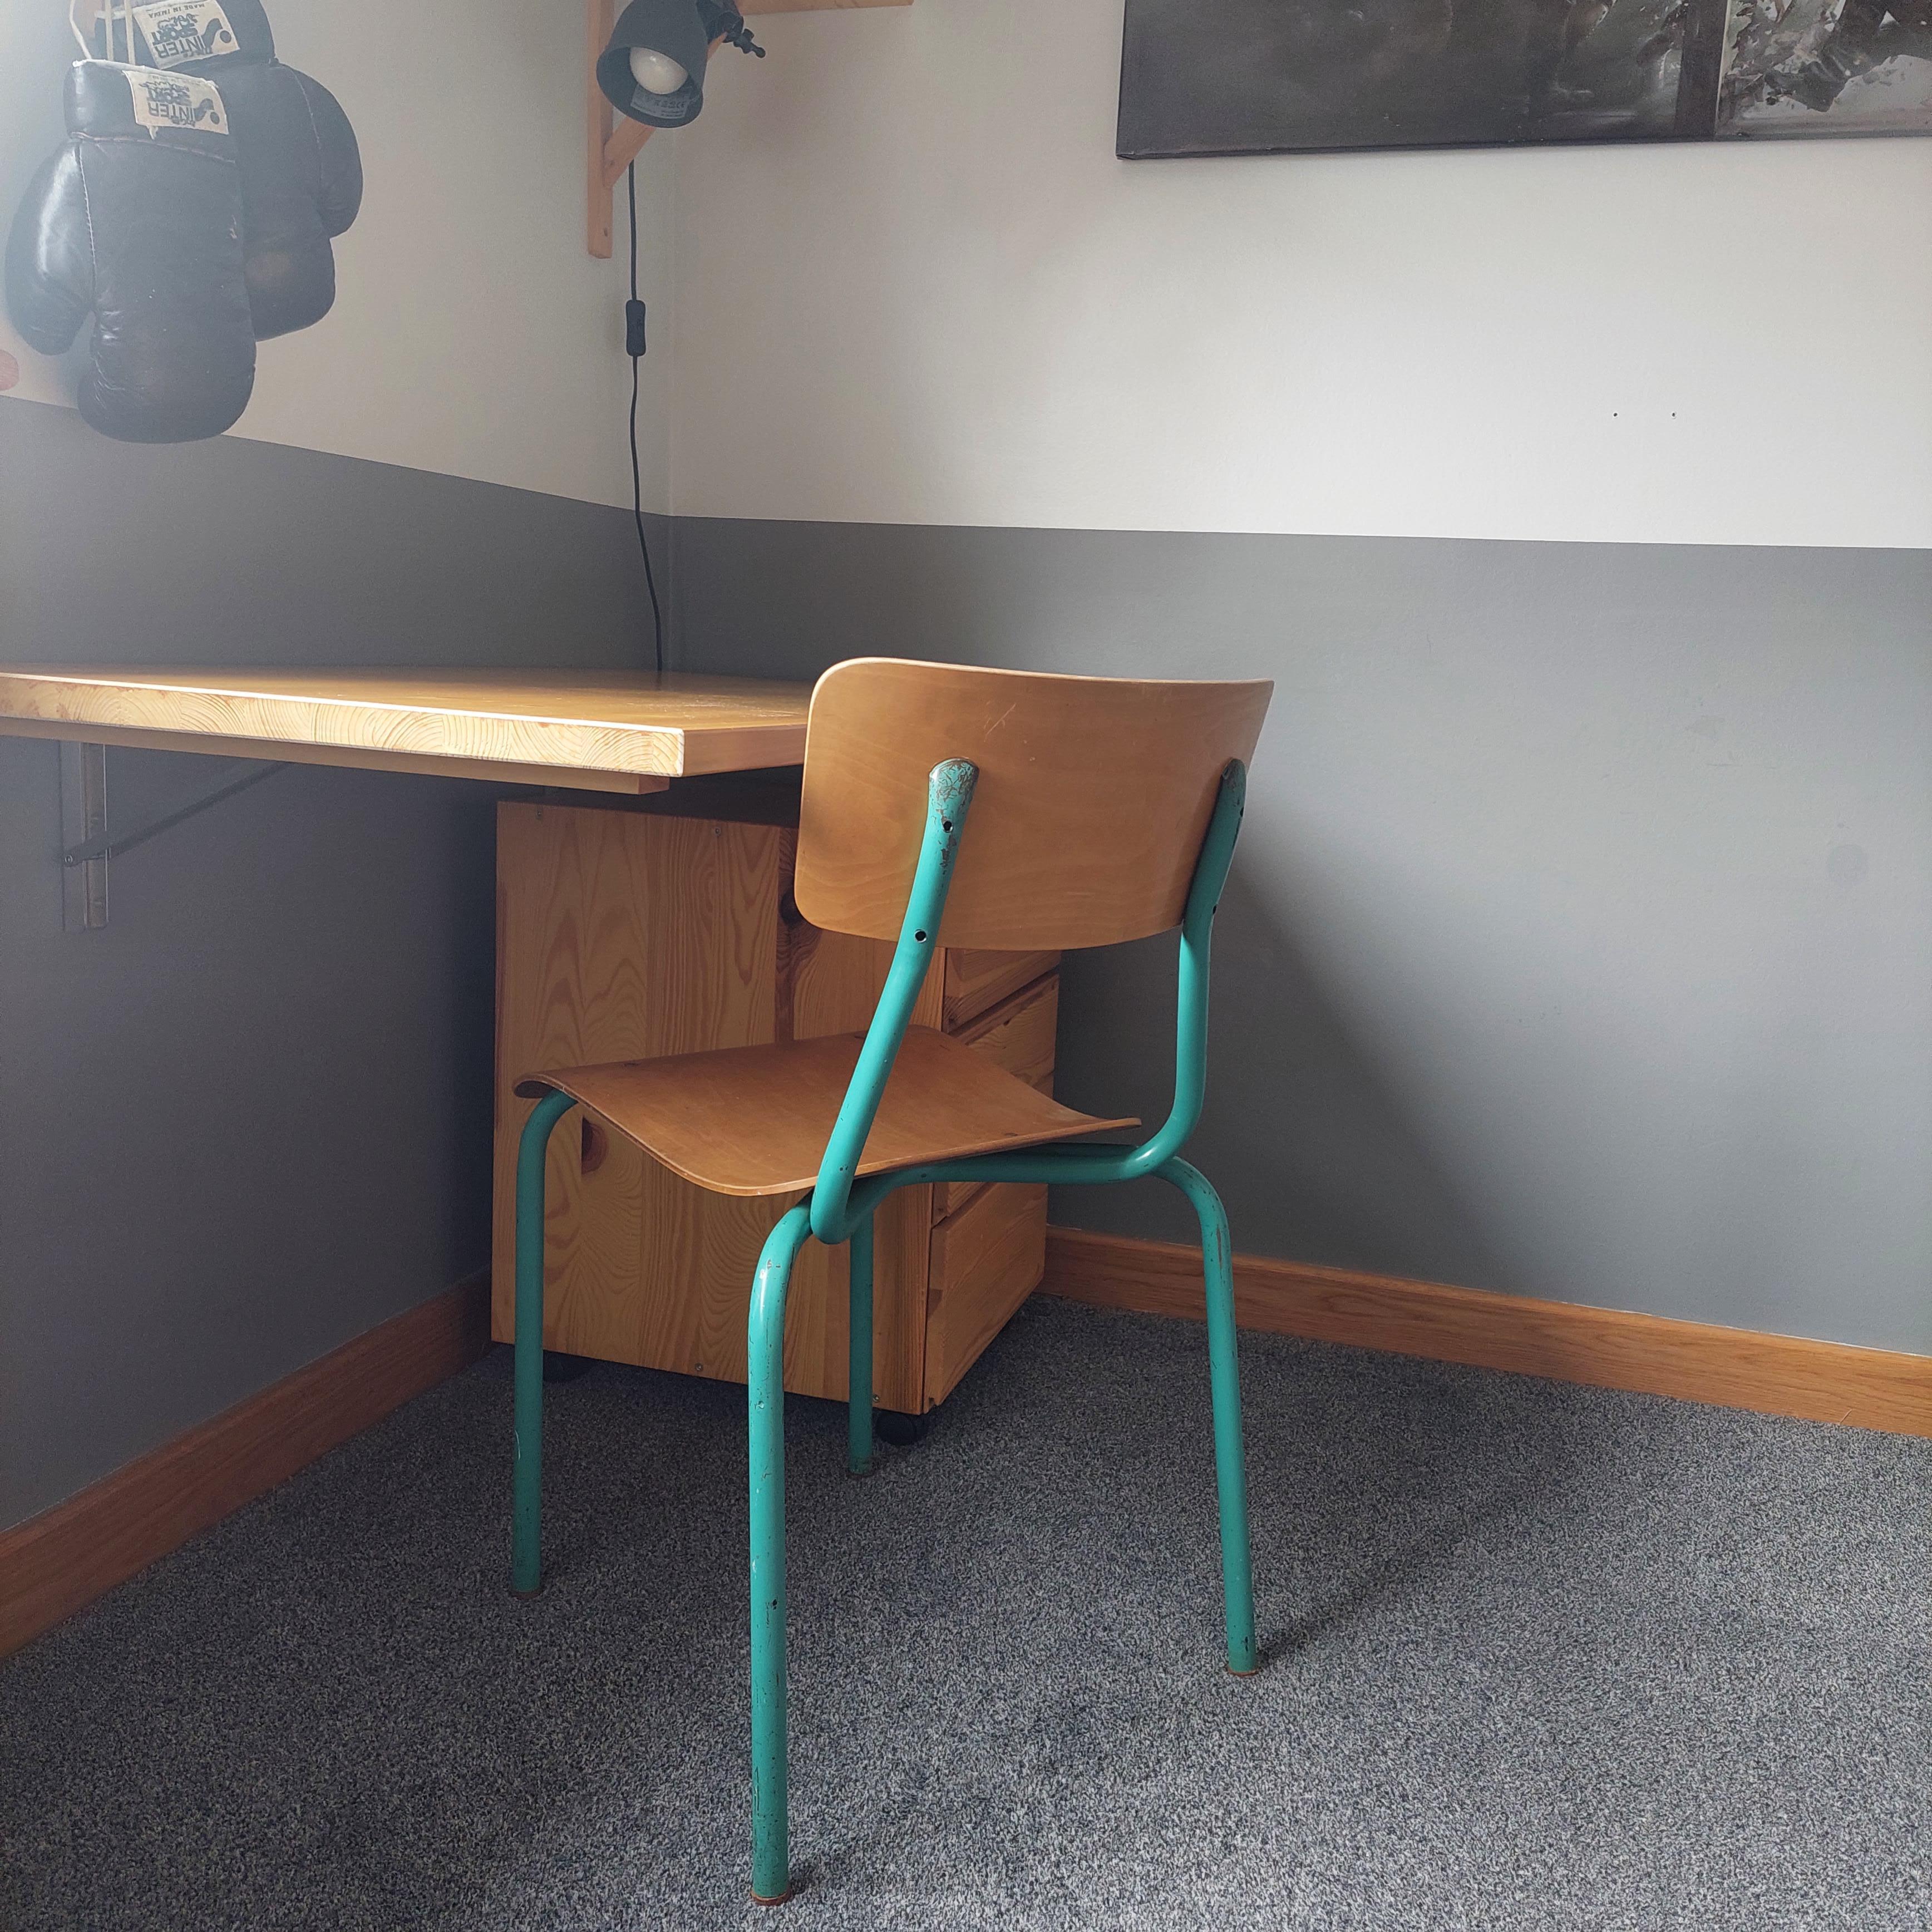 Orignal 1950s Vintage Chair. Turquoise and plywood.
Industrial School Stacking Chair Kitchen Dining Seat Office 1950-1960s
Ideal for any retro or industrail interior, restaurant, cafe, etc.
Adult size
French Mullca style
The Chair has a